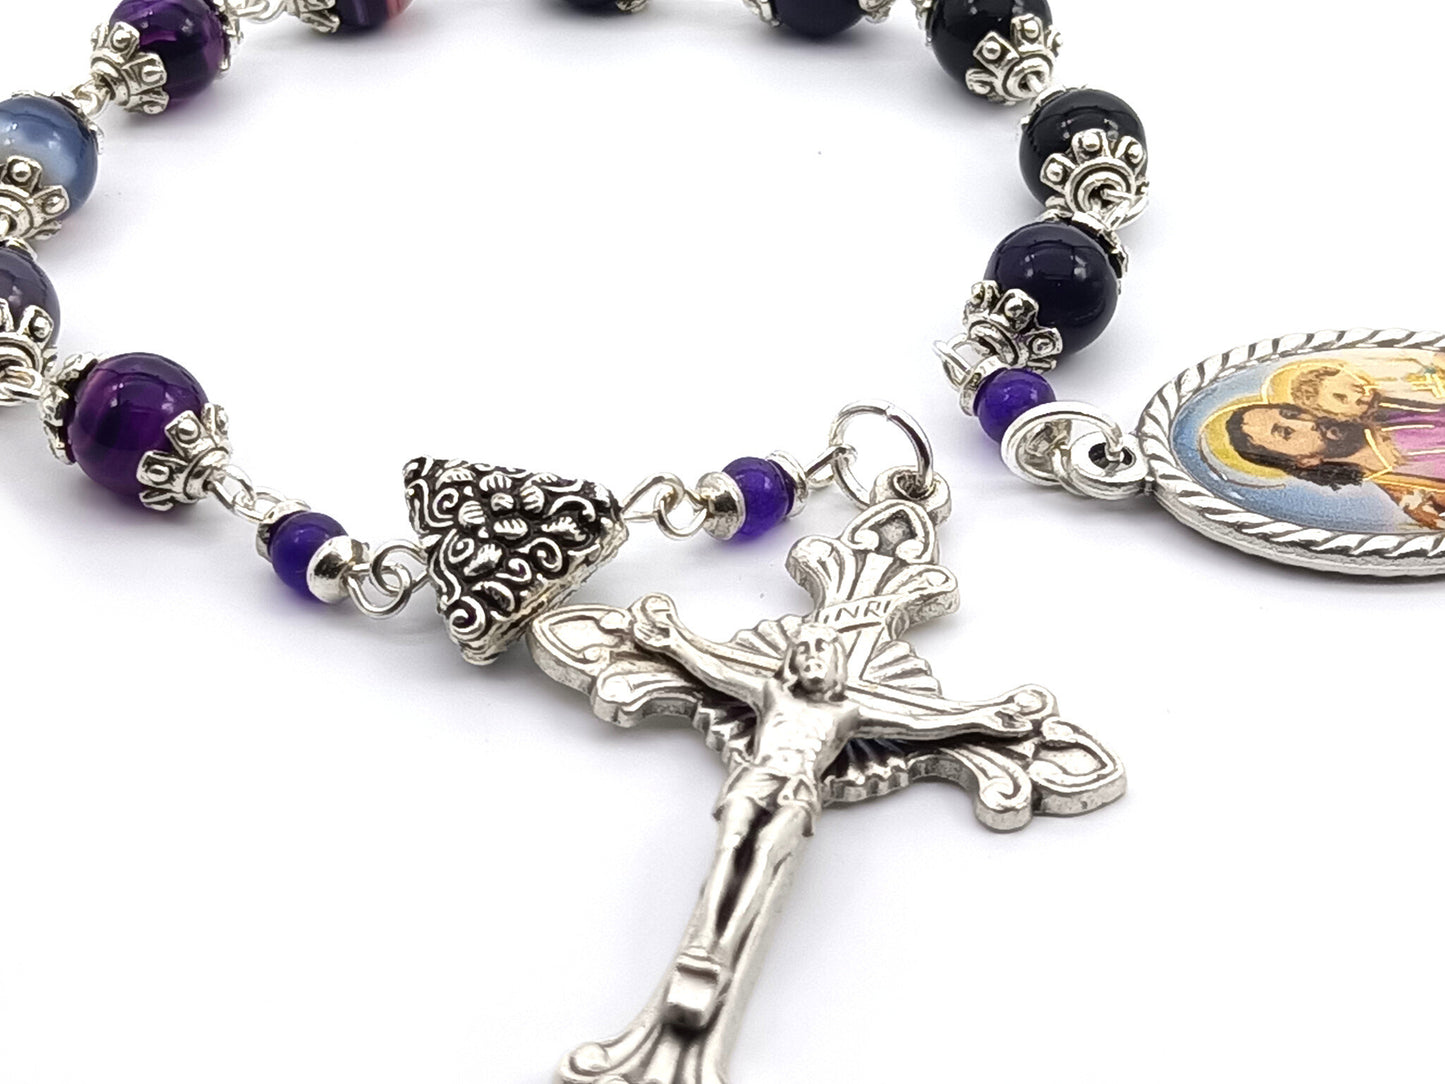 Saint Joseph unique rosary beads single decade with purple gemstone beads, silver crucifix, pater bead and St. Joseph picture centre medal.